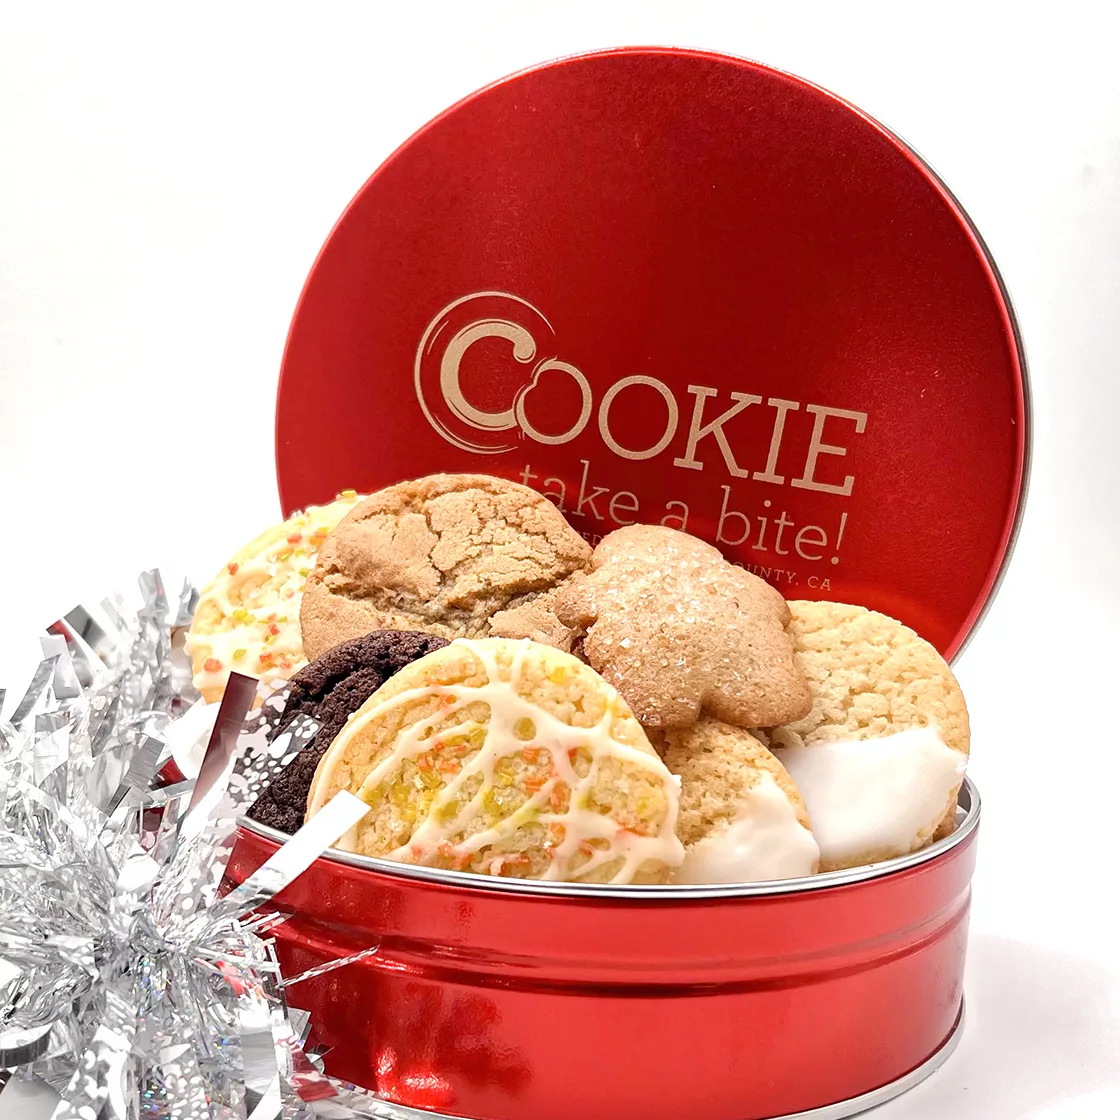 A deluxe holiday cookie gift tin, featuring over 18 natural cookies in seasonal flavors.